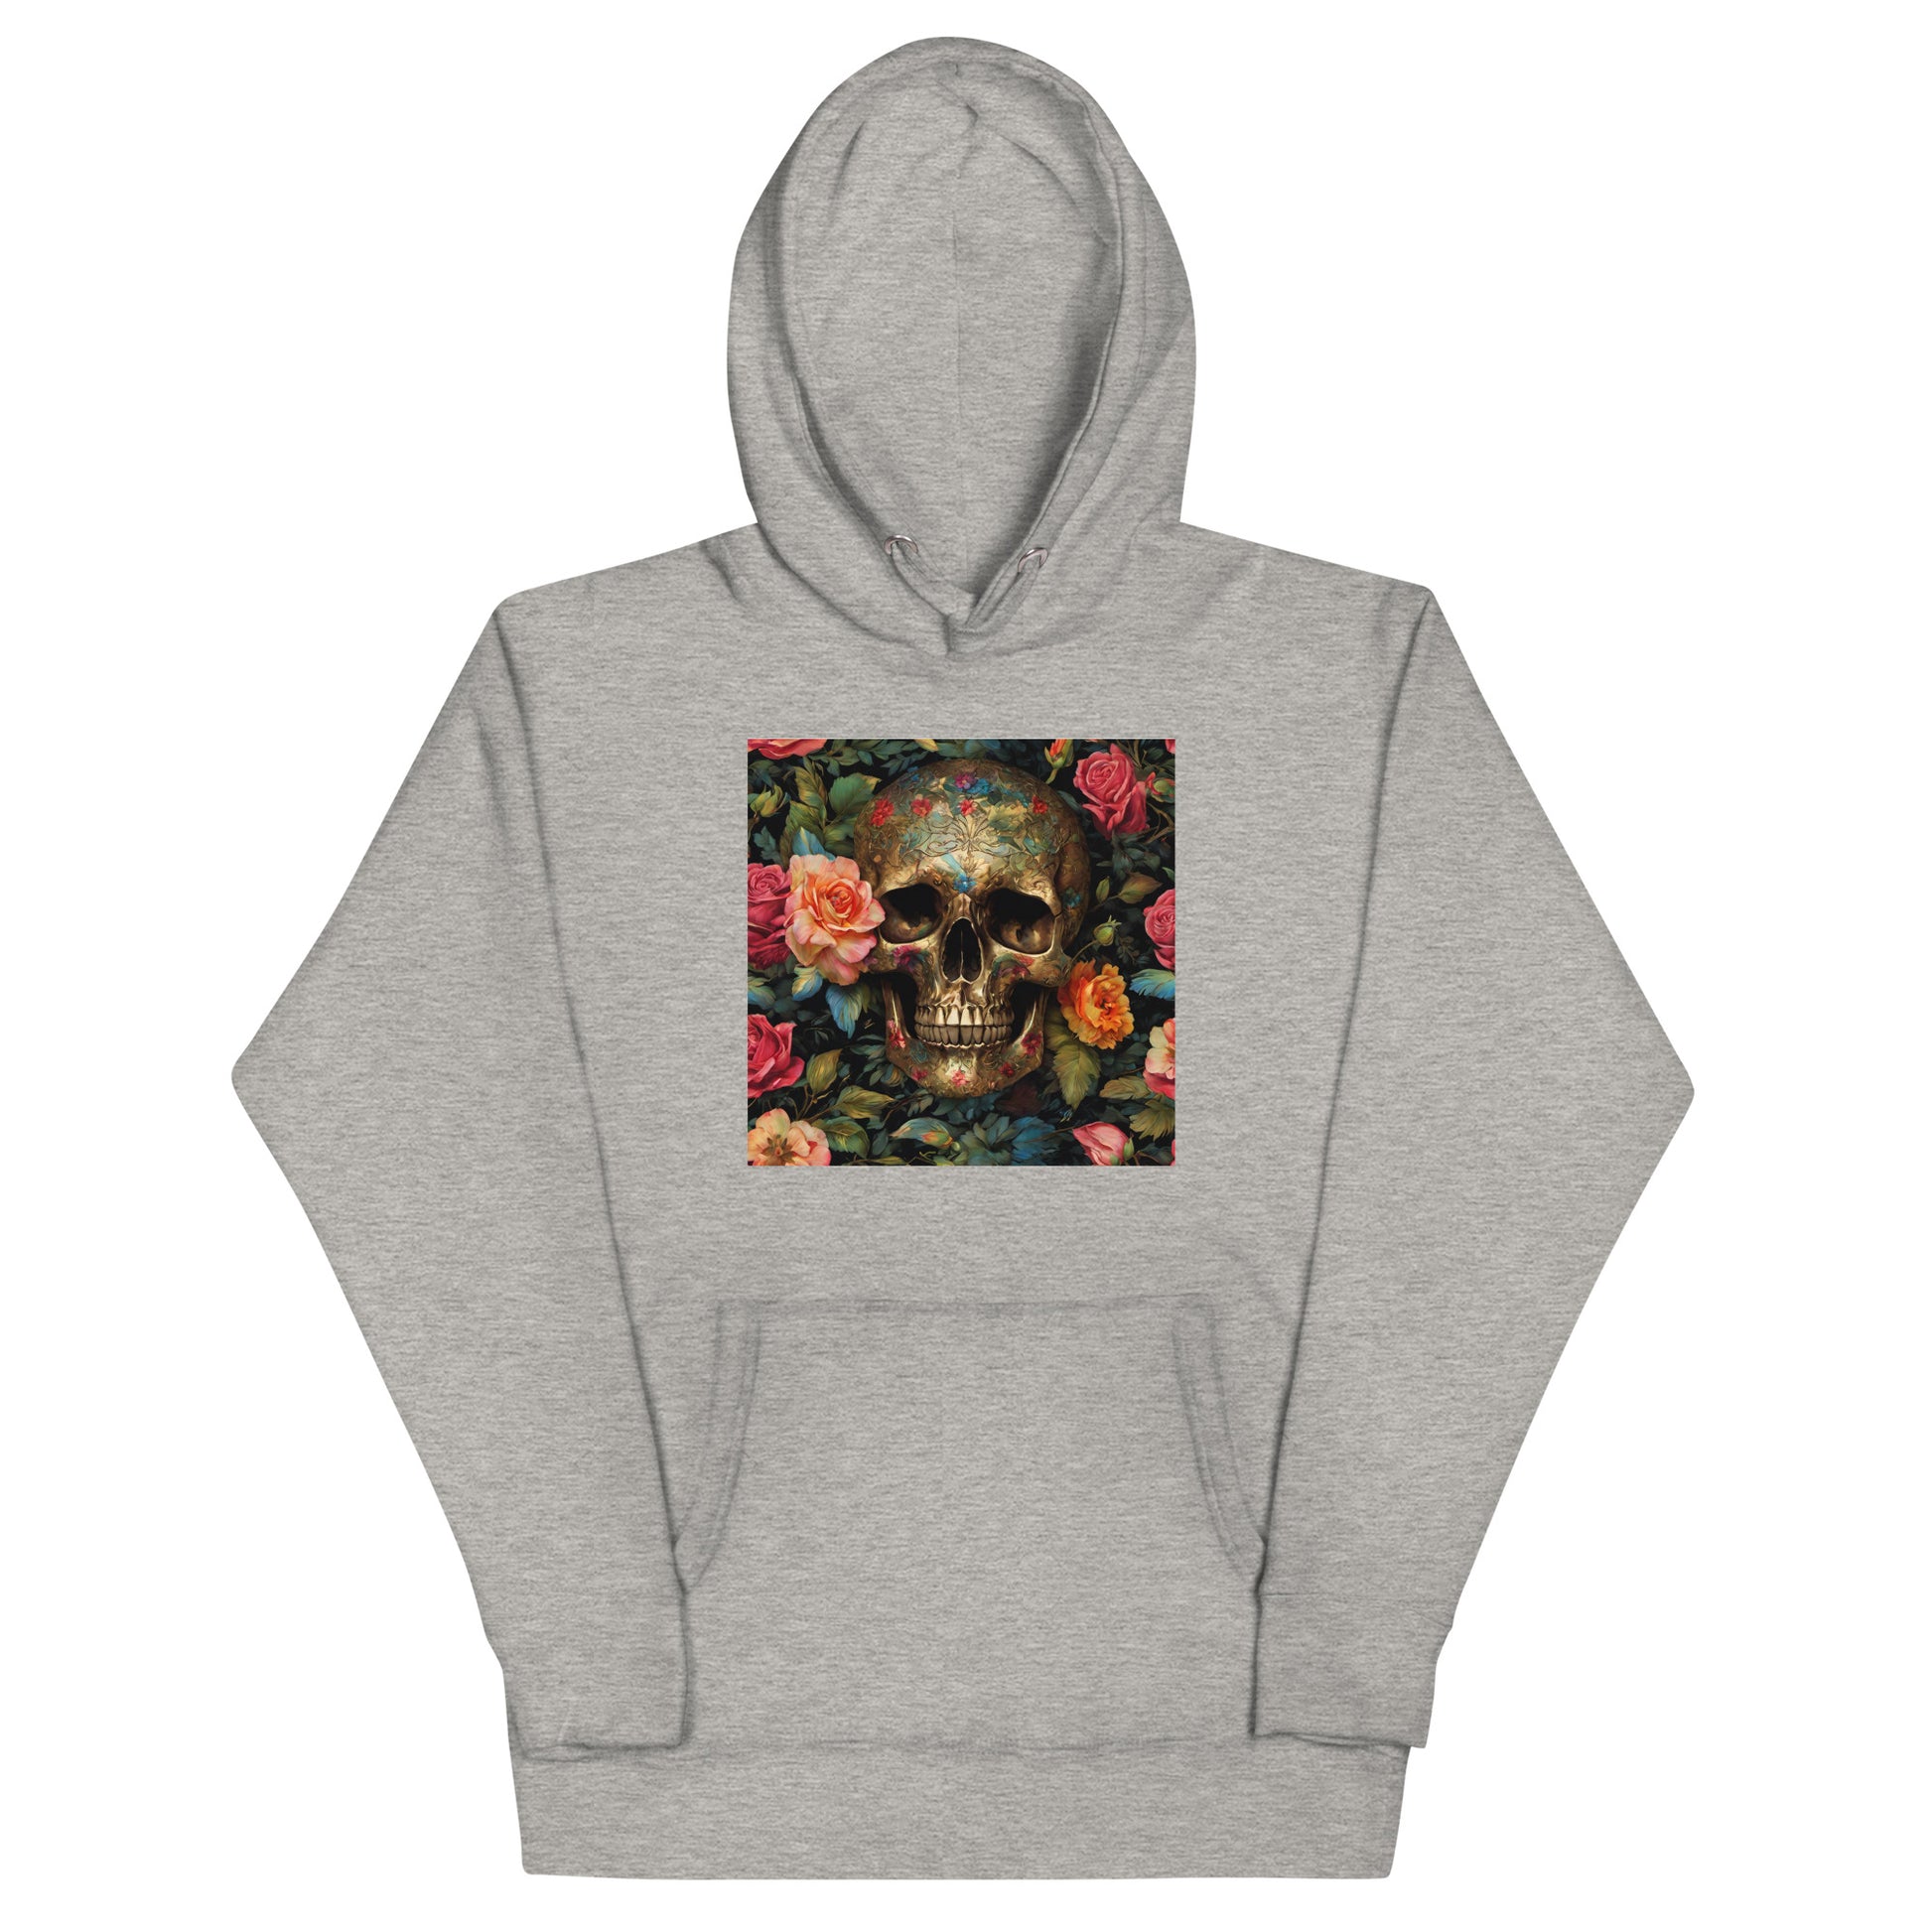 Skull and Roses Graphic Hoodie Carbon Grey